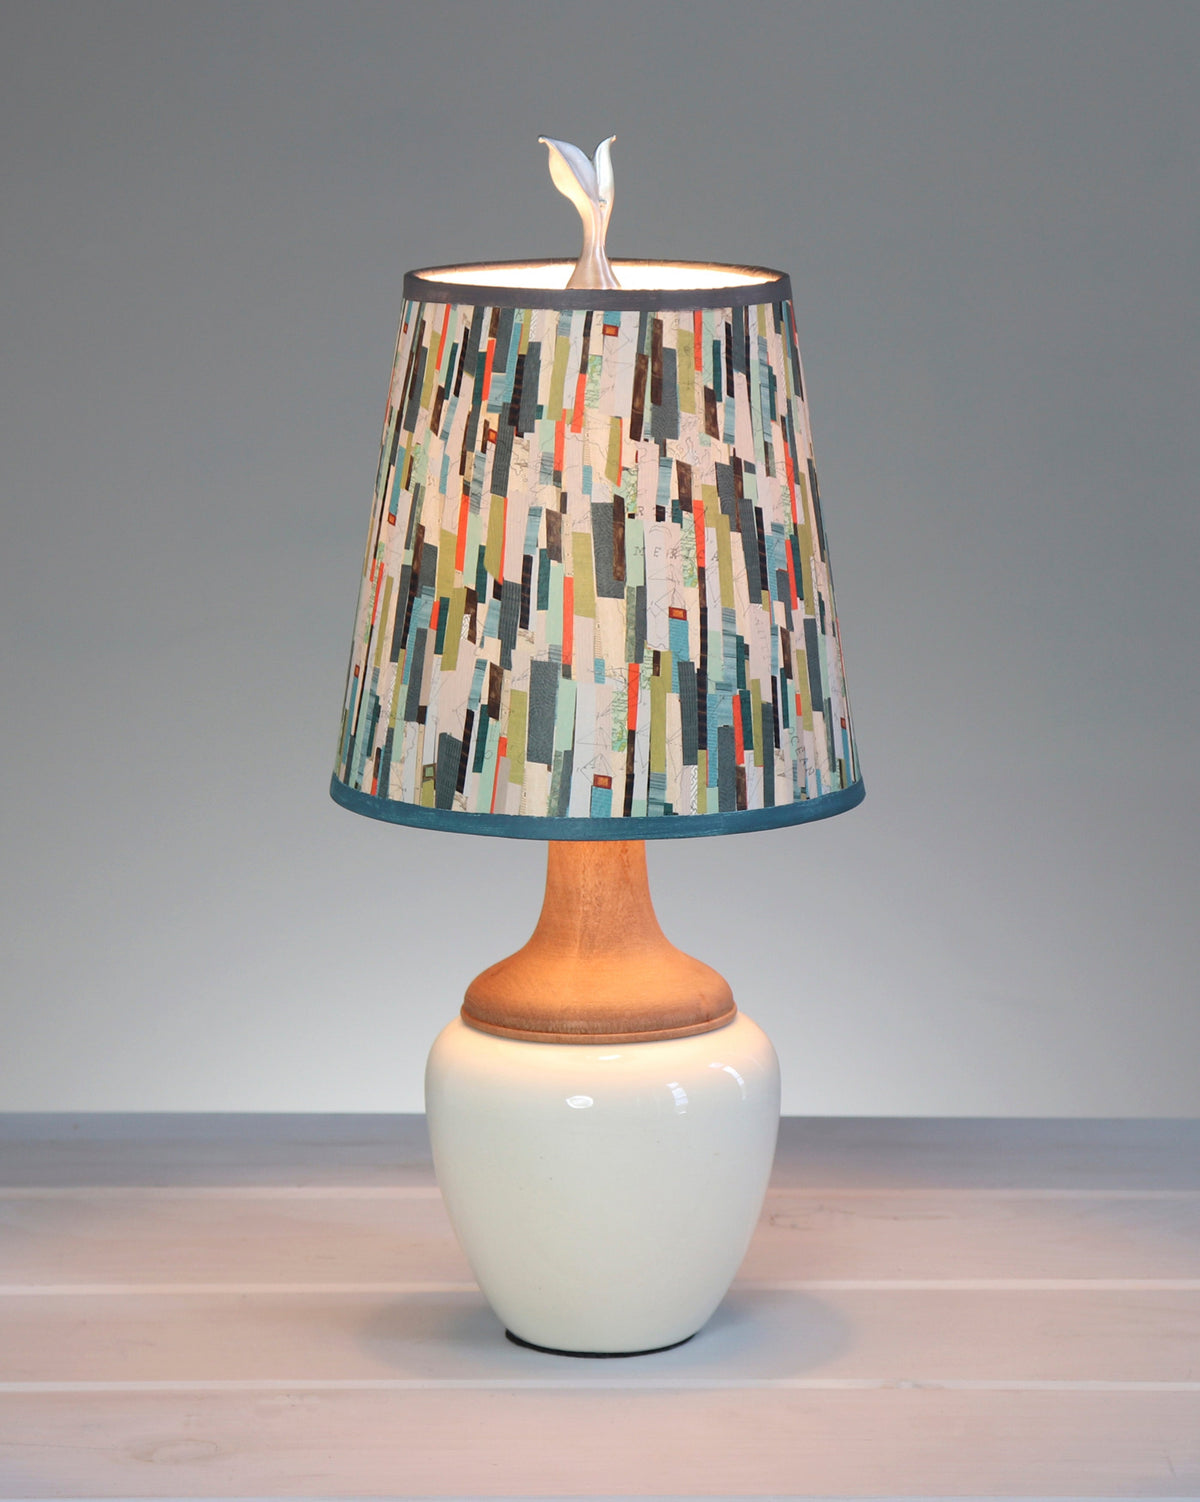 Janna Ugone &amp; Co Table Lamps Ceramic and Maple Table Lamp in Ivory Gloss with Small Drum Shade in Papers